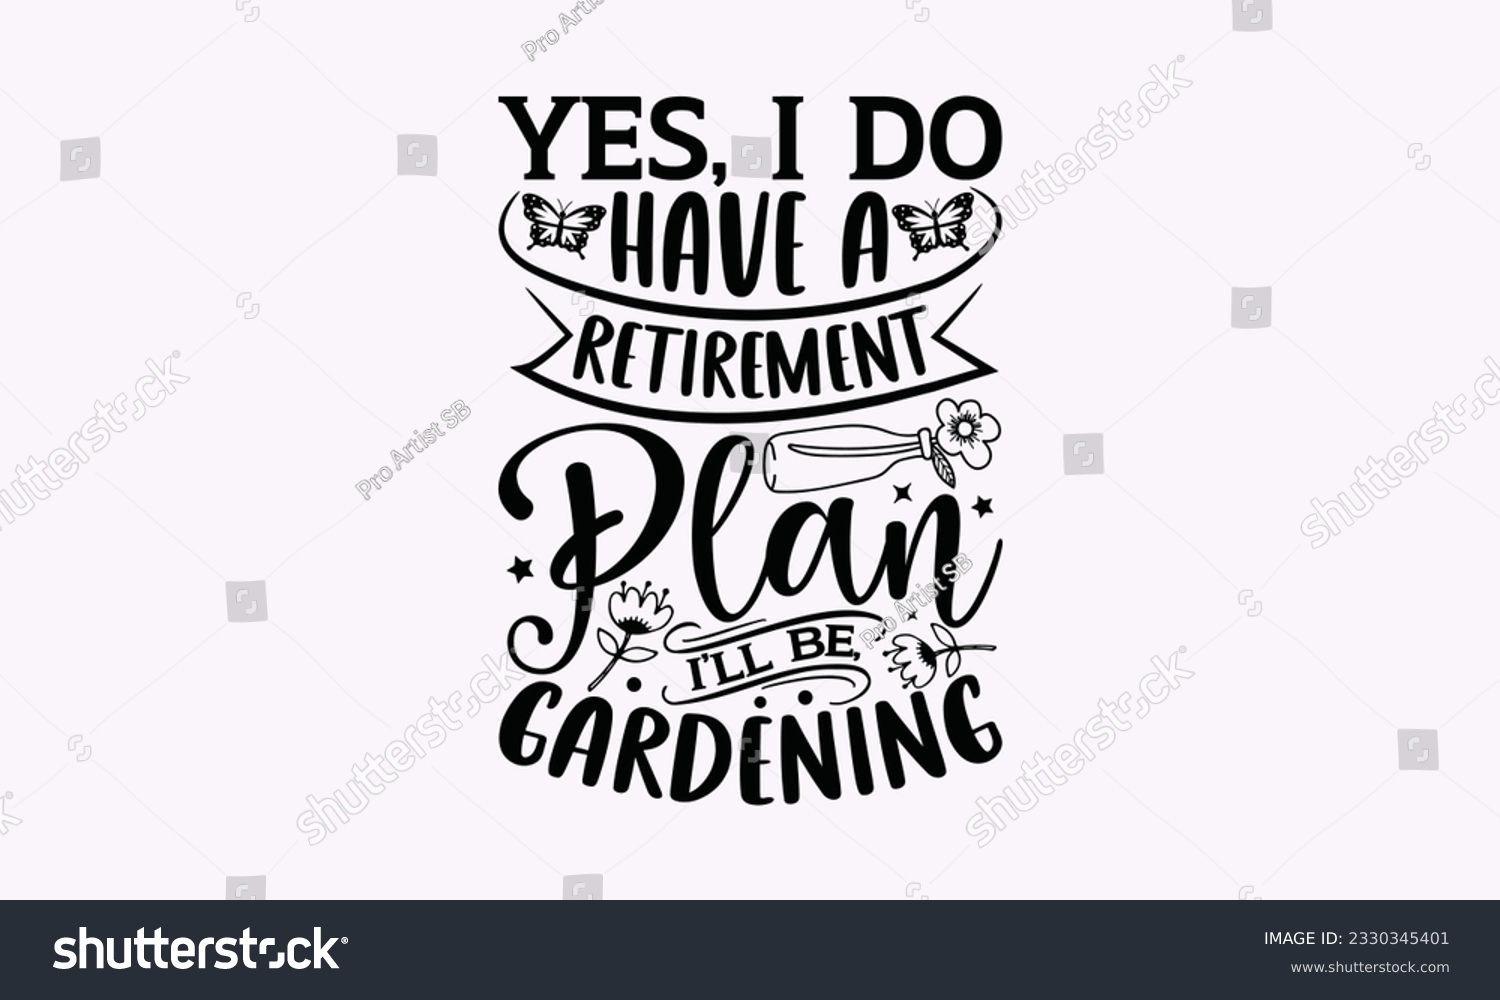 SVG of Yes, I do have a retirement plan I’ll be, gardening - Gardening SVG Design, Flower Quotes, Calligraphy graphic design, Typography poster with old style camera and quote. svg